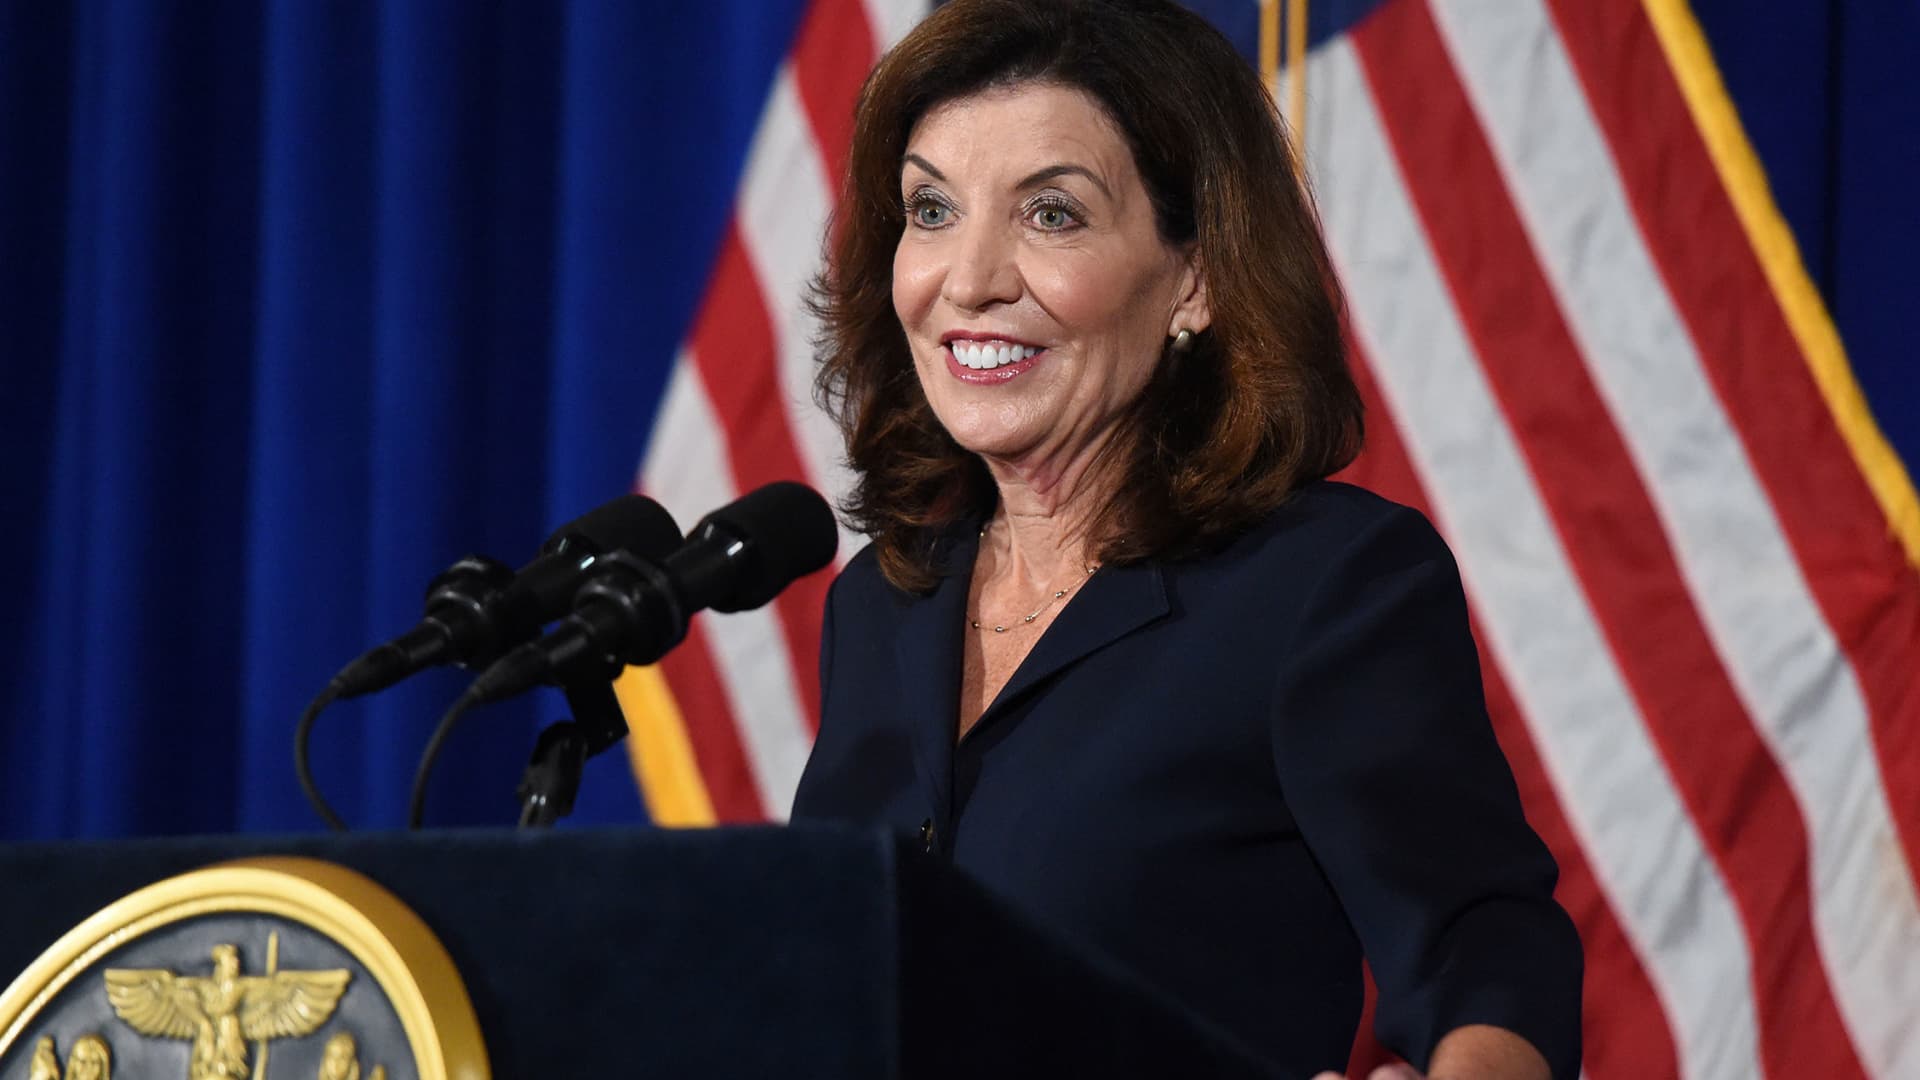 New York Lieutenant Governor Kathy Hochul speaks during a news conference the day after Governor Andrew Cuomo announced his resignation at the New York State Capitol, in Albany, New York, August 11, 2021.